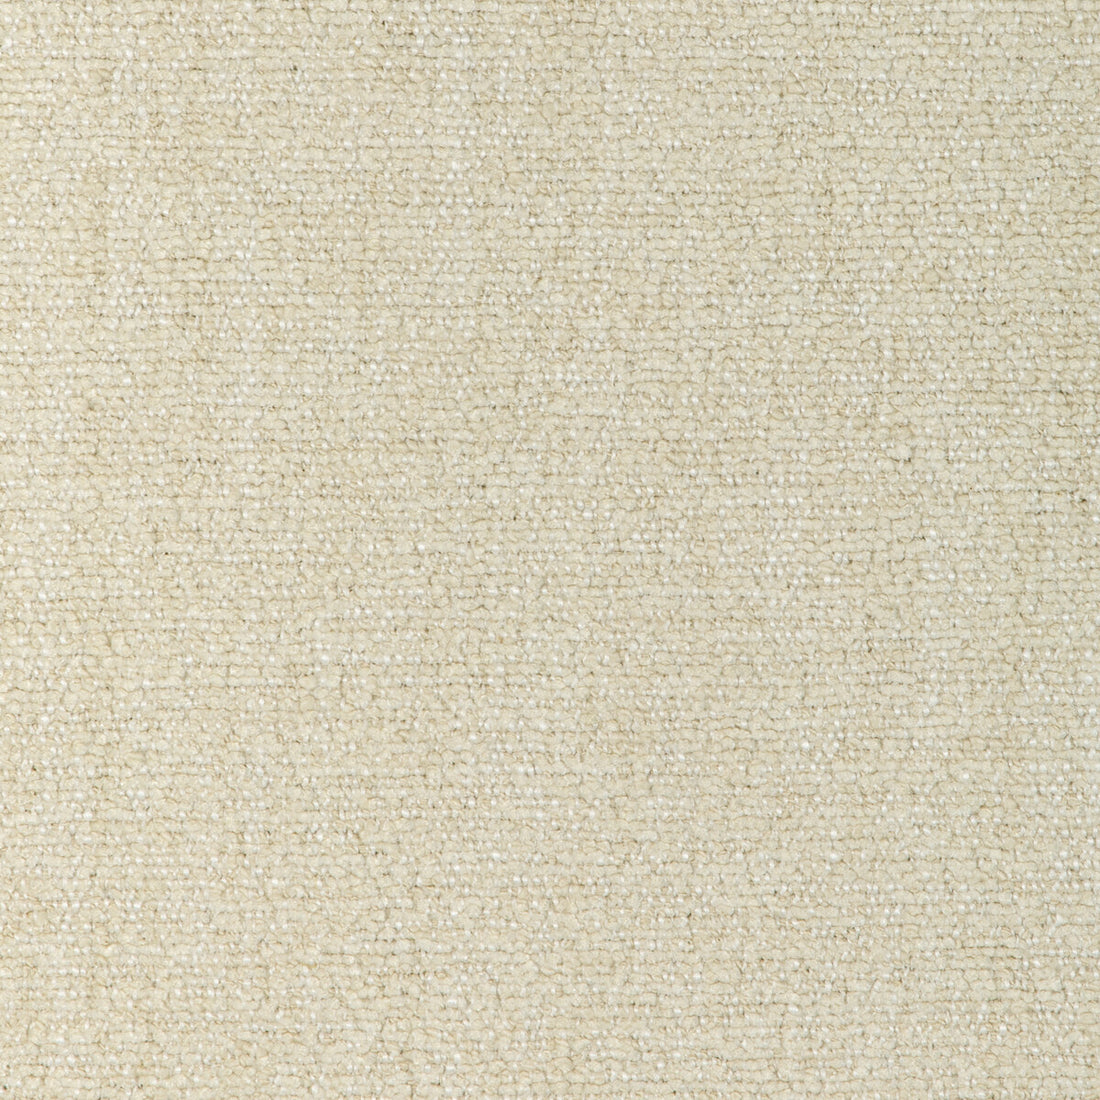 Nubby Linen fabric in cream color - pattern 36911.1.0 - by Kravet Couture in the Atelier Weaves collection